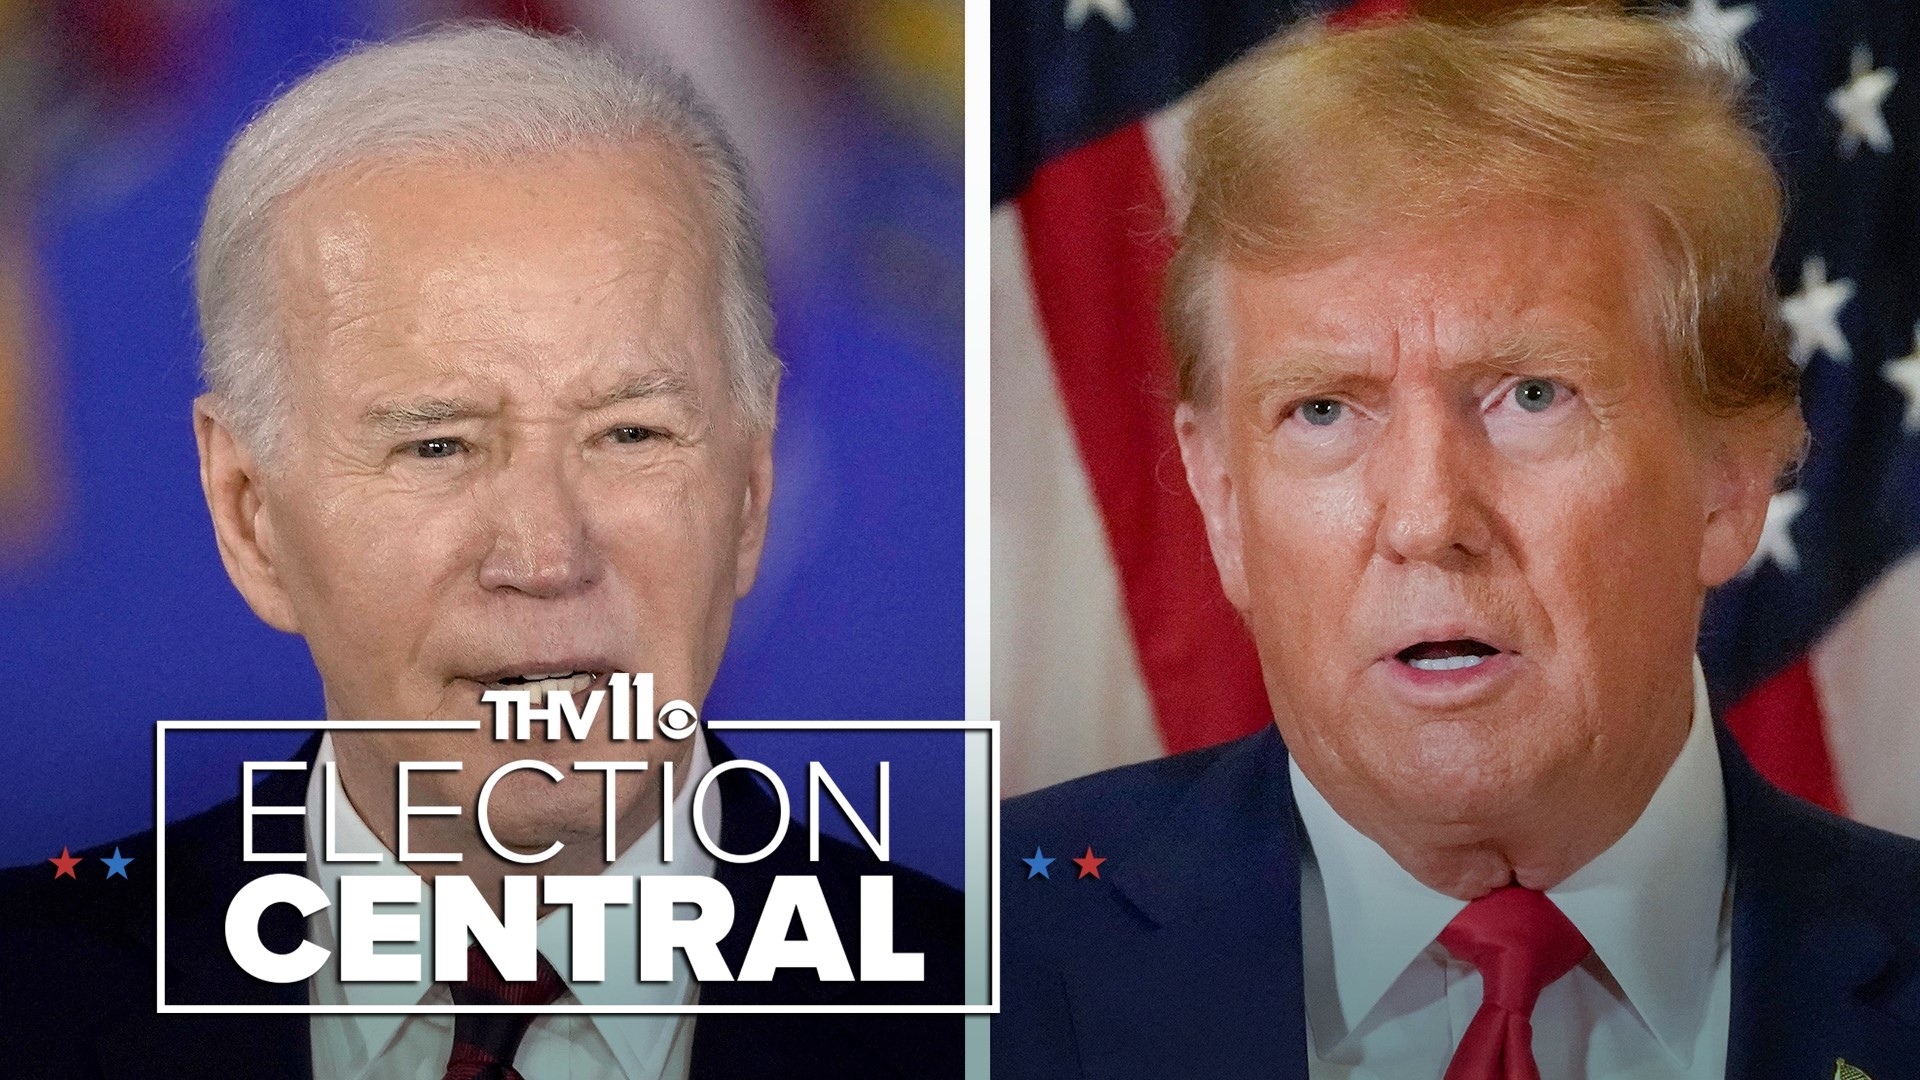 President Biden’s campaign is focused on the issue of abortion rights, while former president Donald Trump talks about immigration in key battleground states.